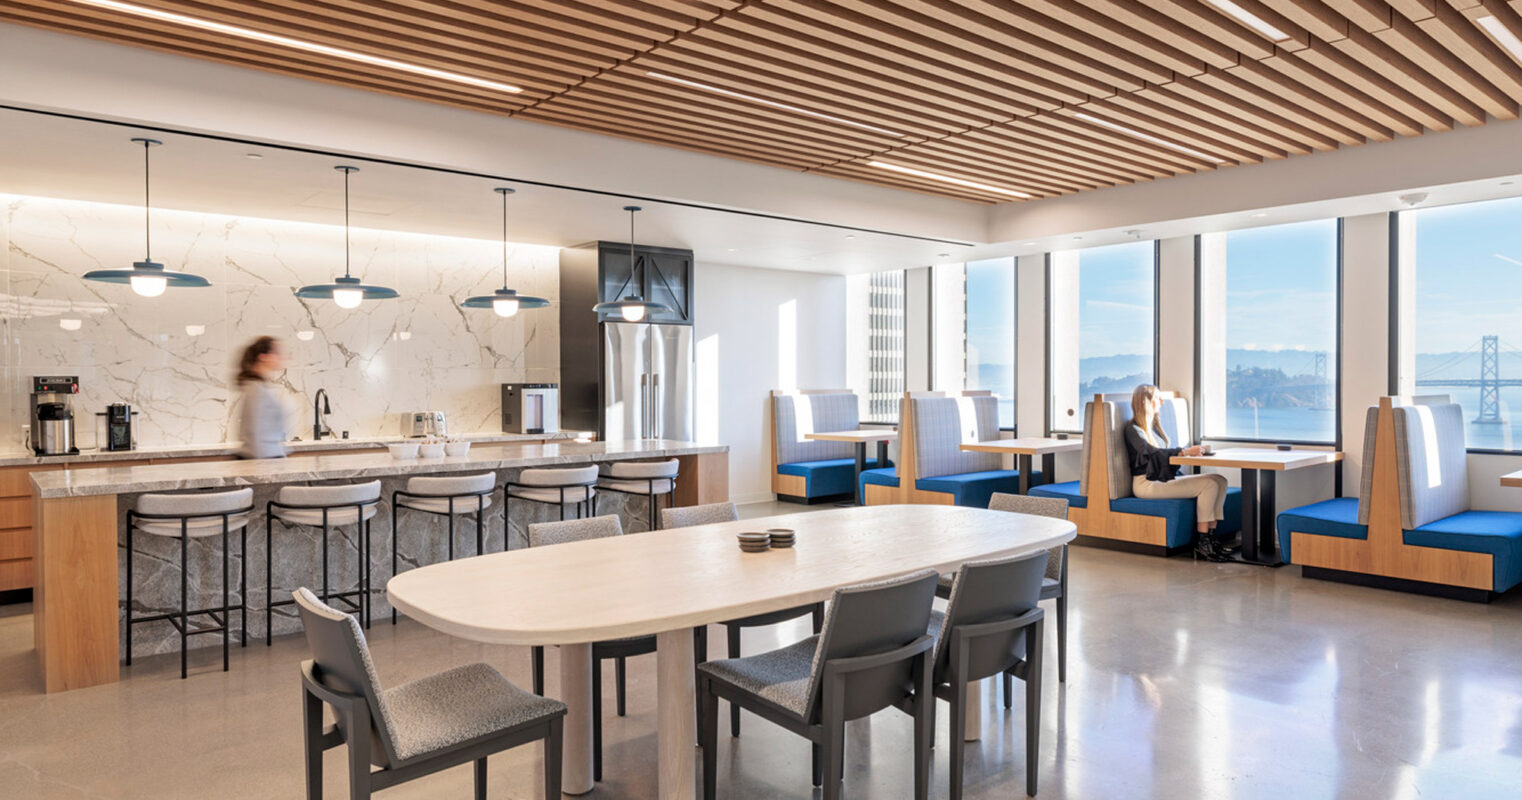 Modern open-plan kitchen and dining space with expansive windows offering natural light, featuring sleek marble backsplash, organic wood slat ceiling, and a combination of pendant lighting and recessed spotlights. Monochrome and blue upholstered banquettes contrast with warm wood tones.